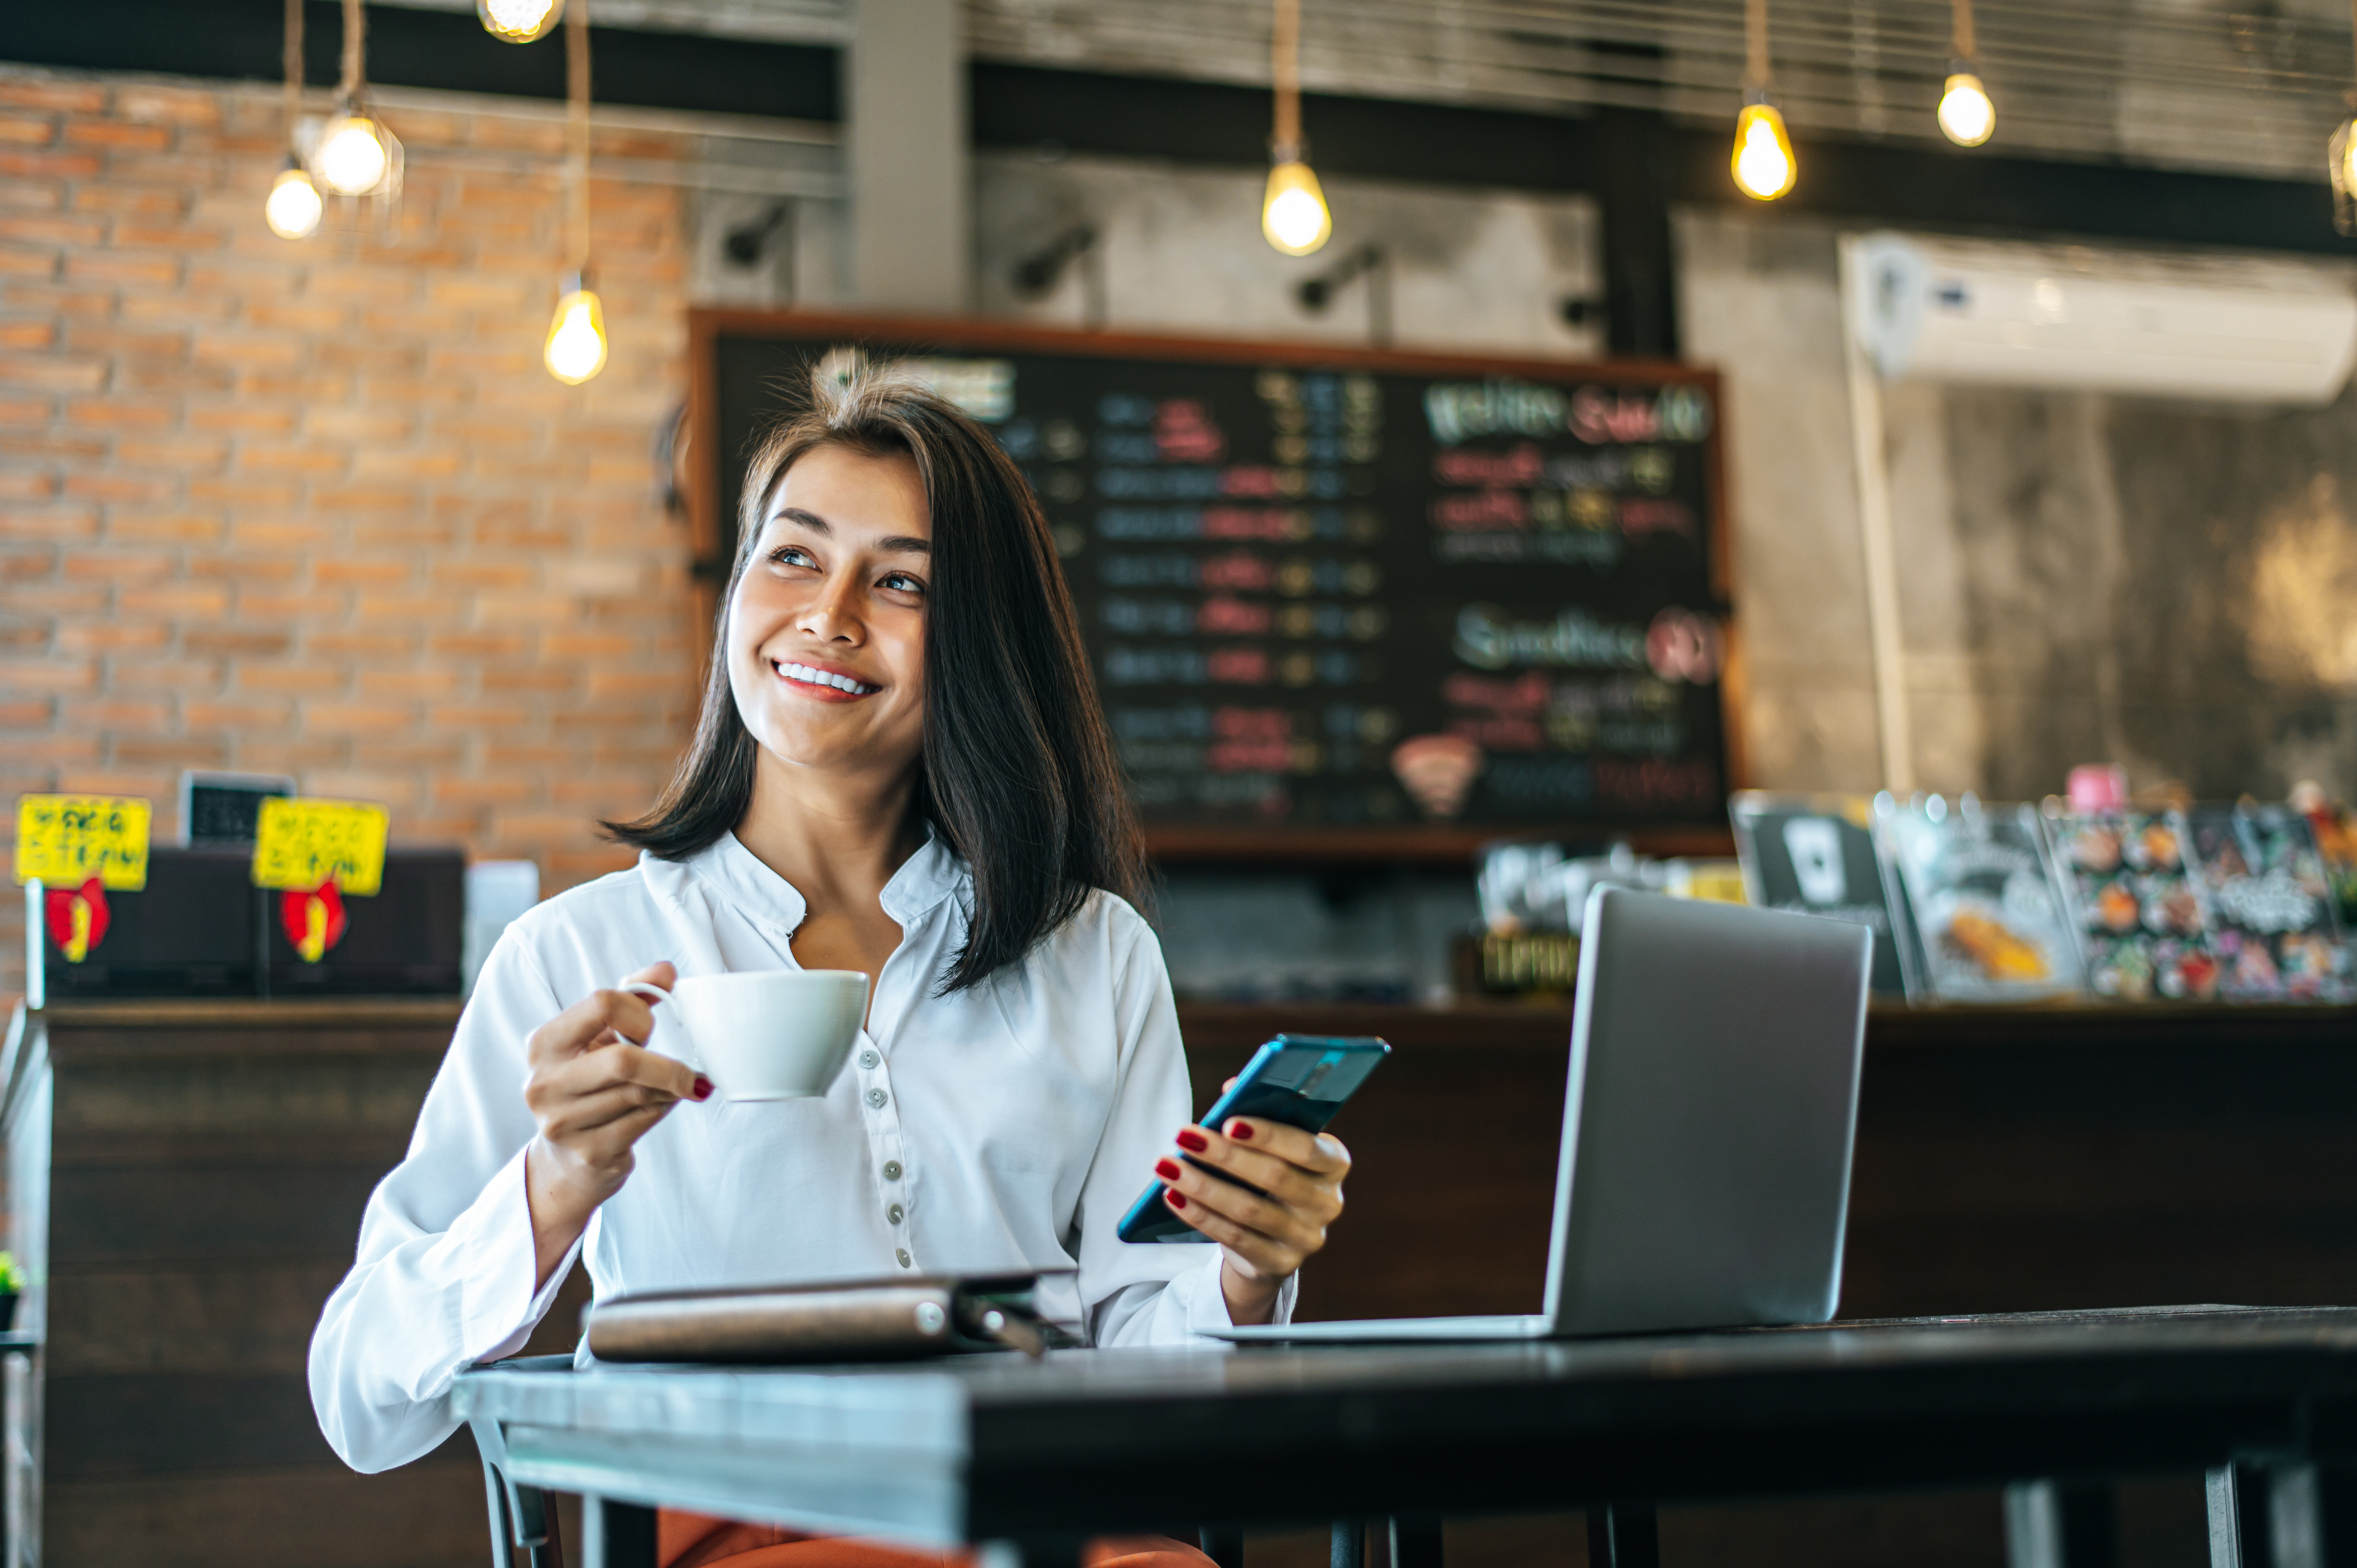 Alternatives to Working from Home or the Local Coffee Shop